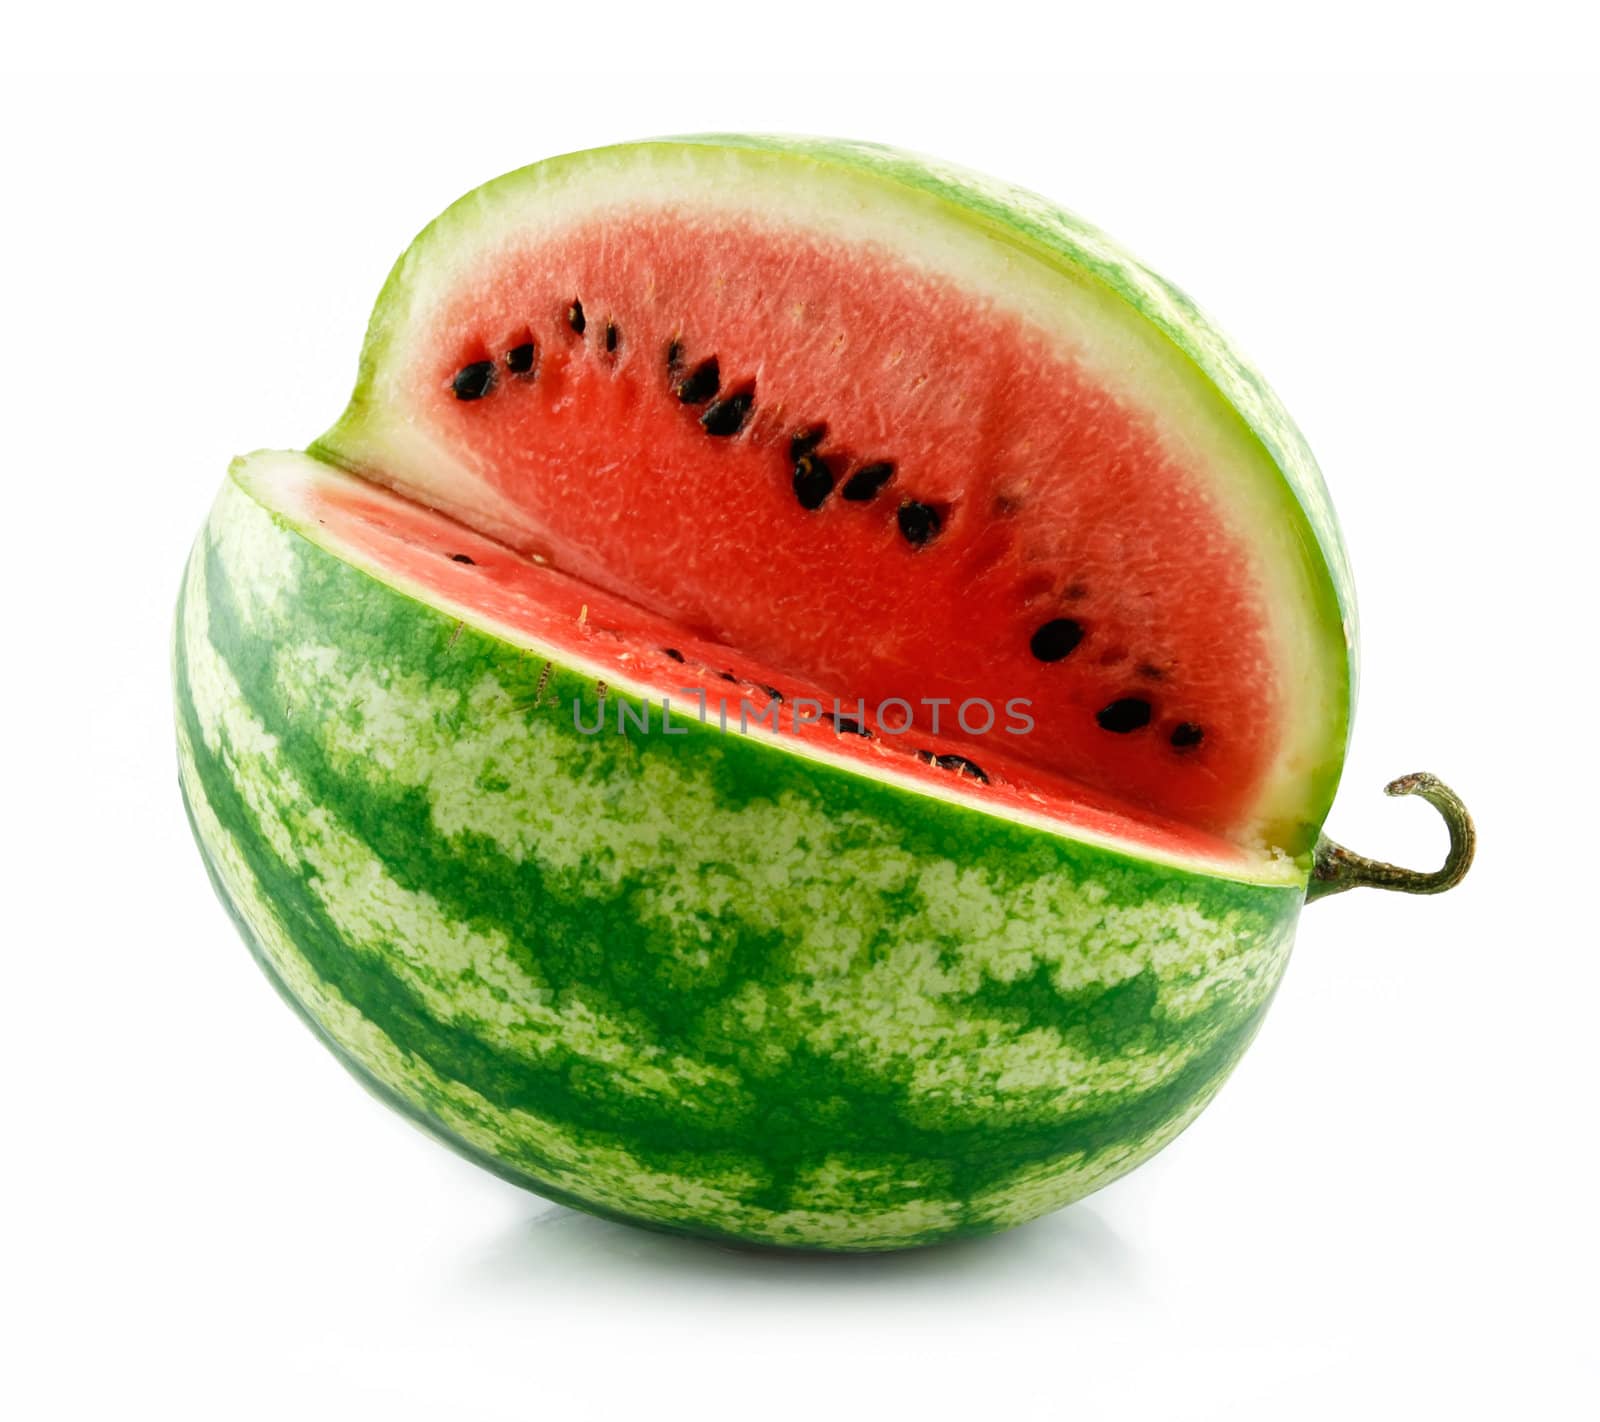 Ripe Sliced Green Watermelon Isolated on White Background